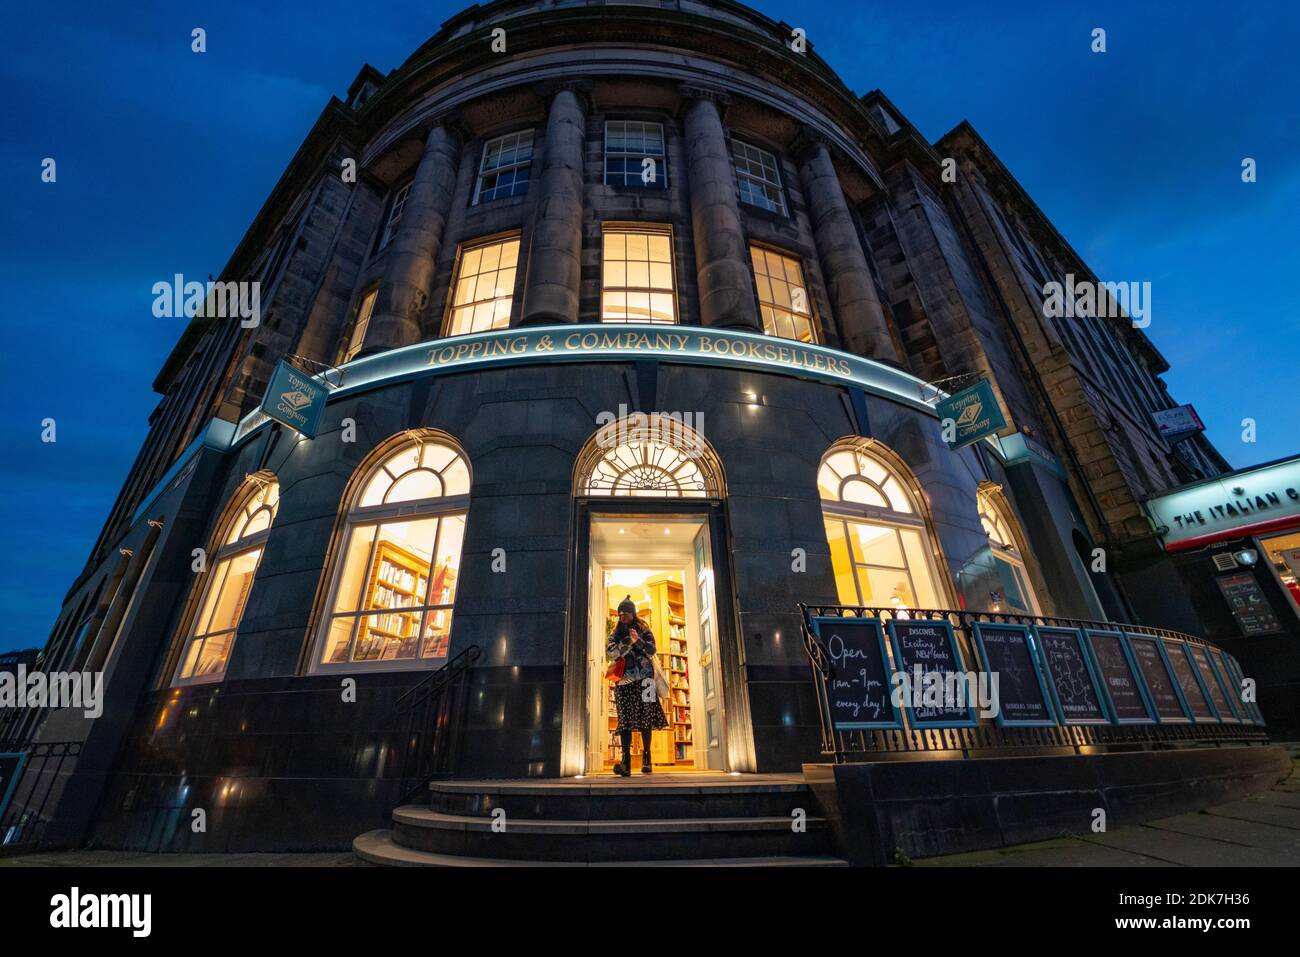 Exterior of Topping & Company booksellers on Leith Walk, Edinburgh, Scotland, UK Stock Photo